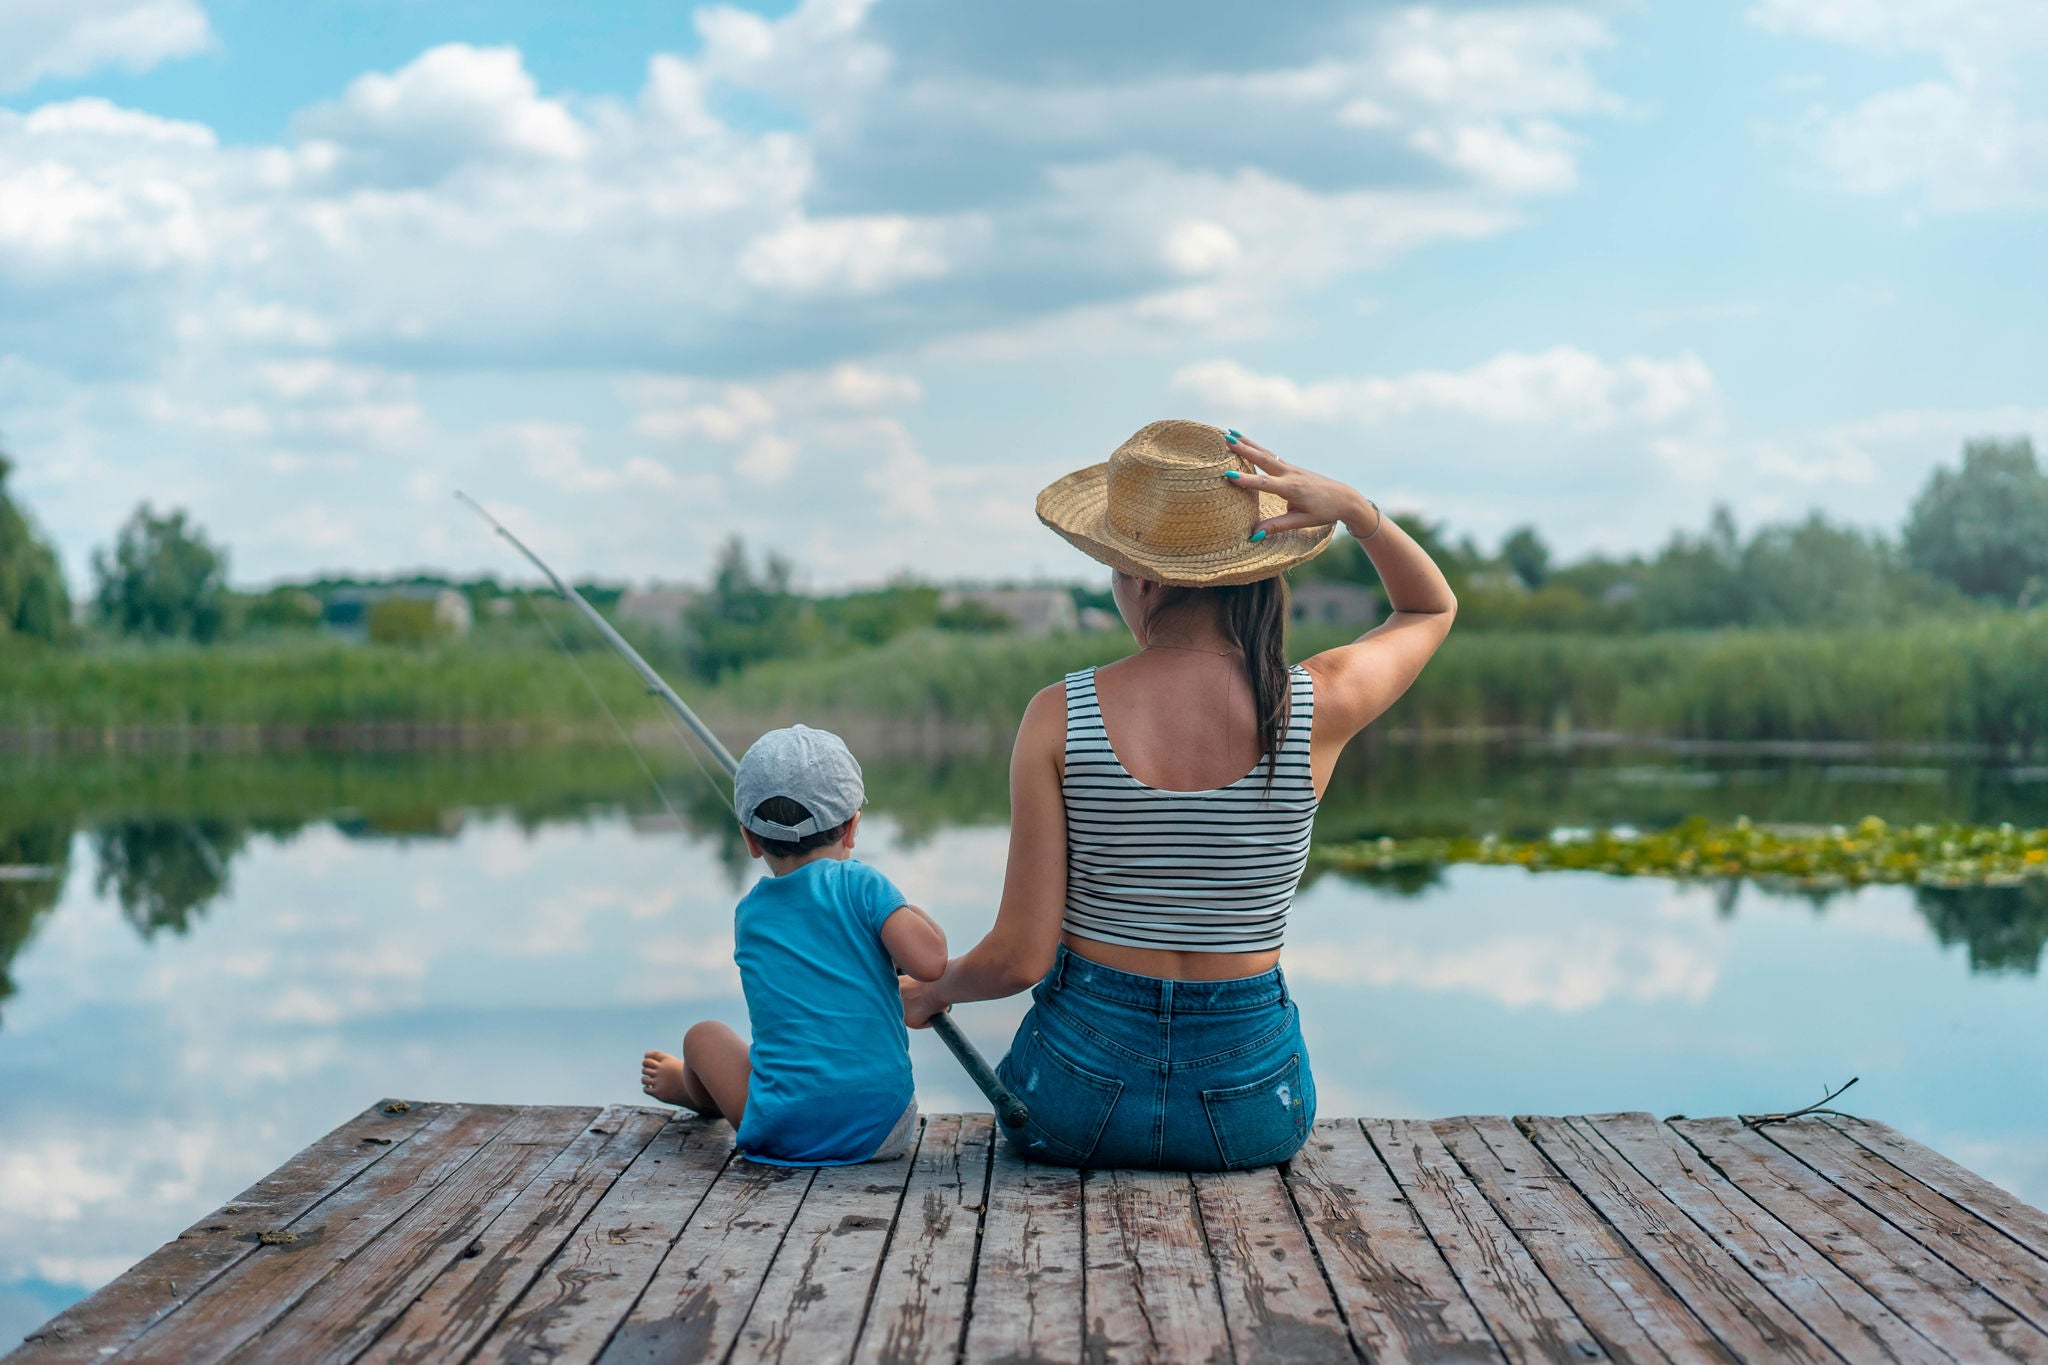 Mother and child fishing off a dock together.